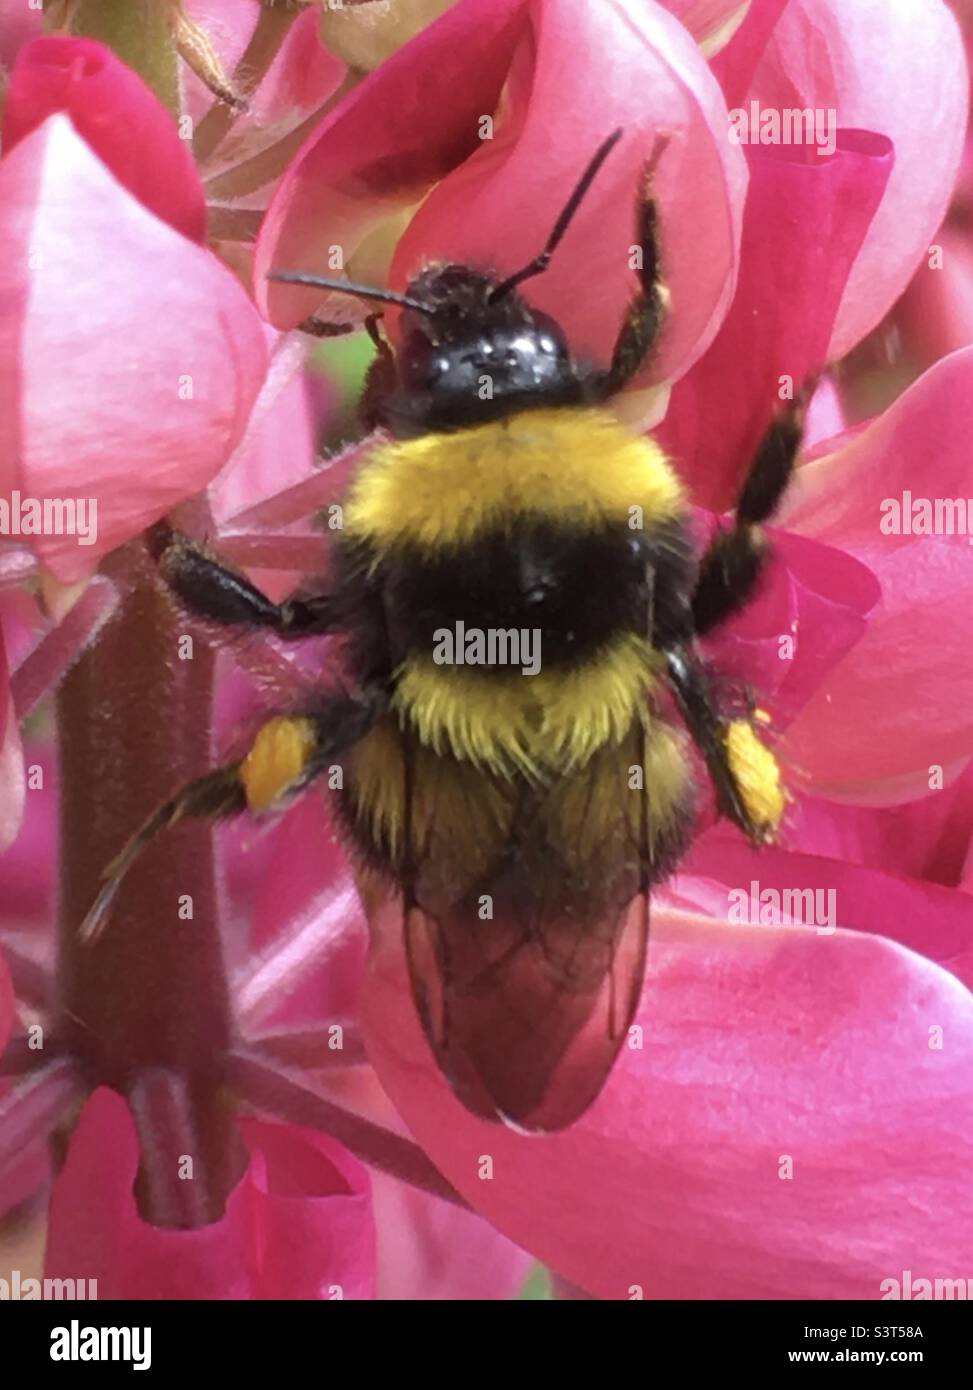 Bee, flower, pink, yellow, black, action, Stock Photo